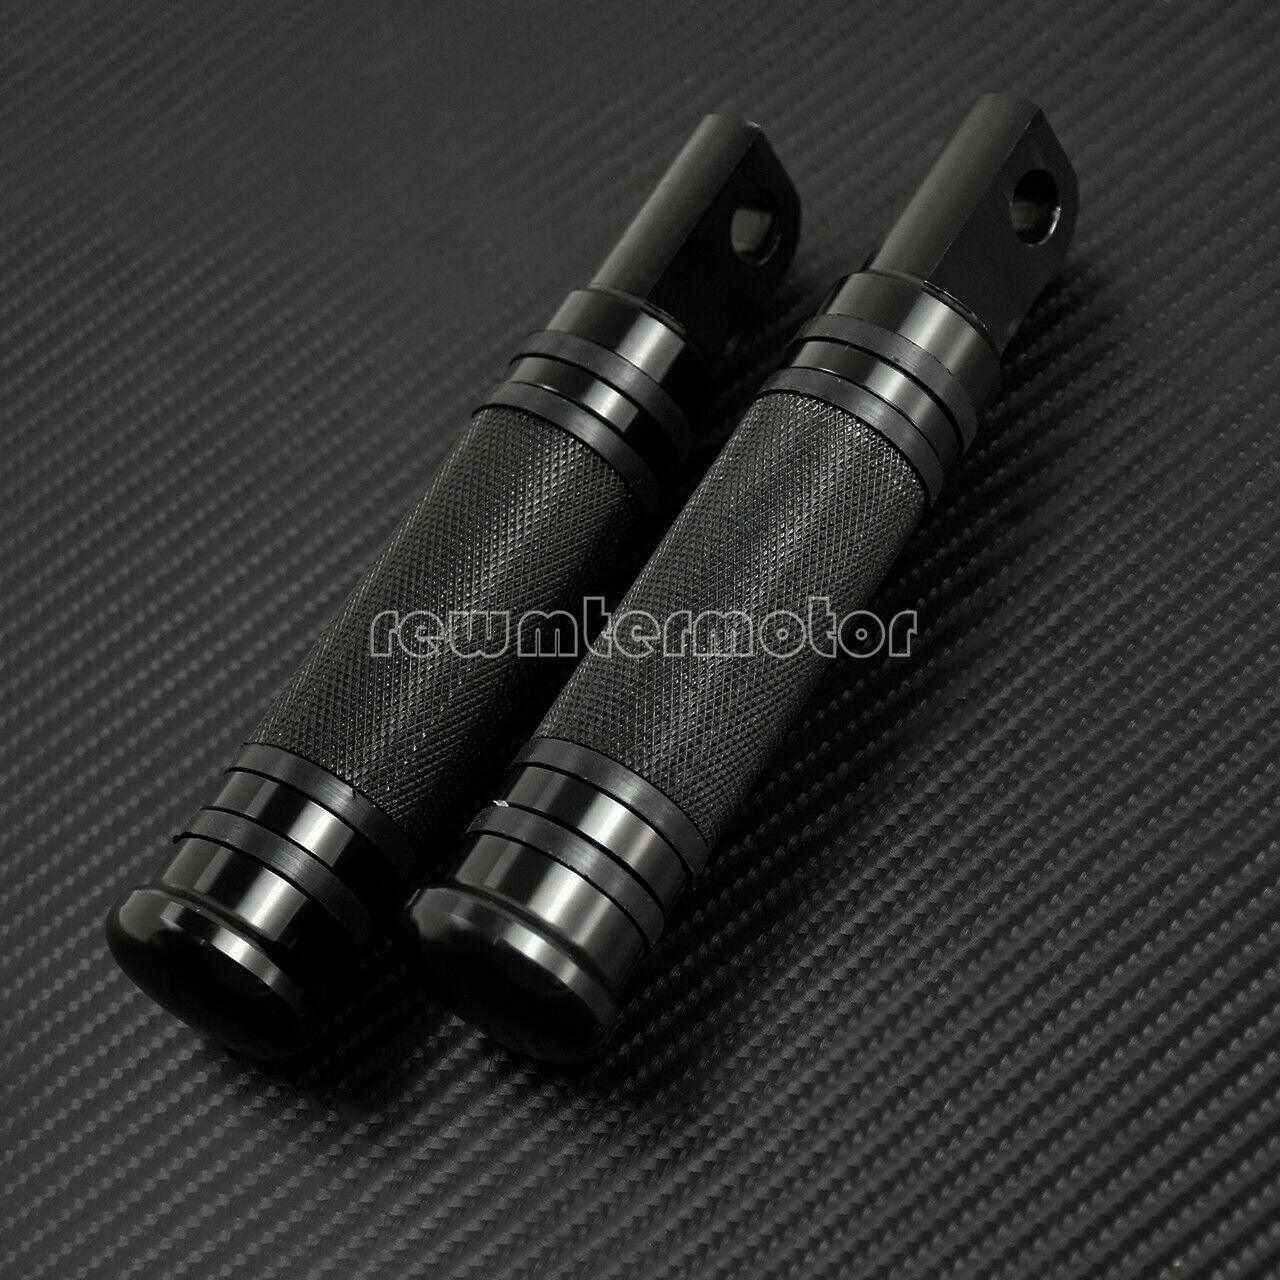 Knurled Rear Front Foot Pegs + Mounting Kit Fit For Harley Sportster Touring - Moto Life Products